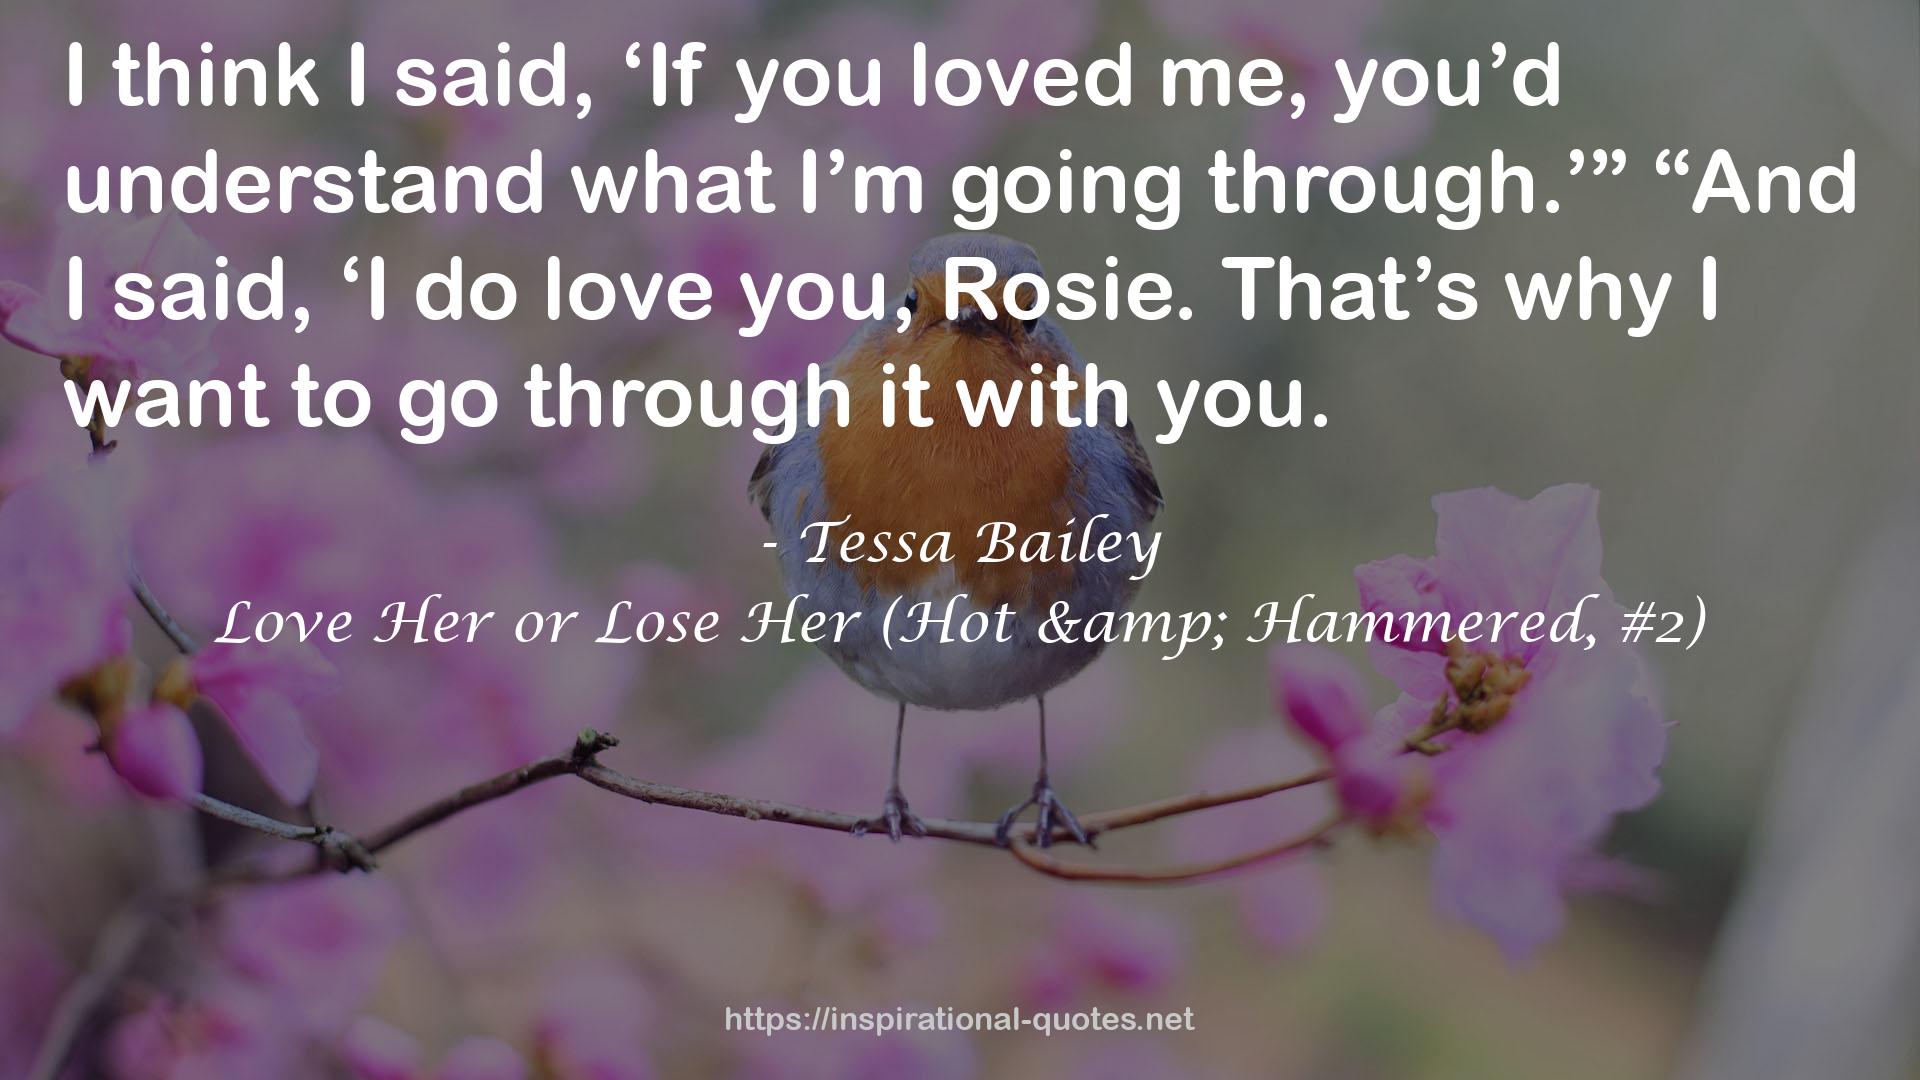 Love Her or Lose Her (Hot & Hammered, #2) QUOTES